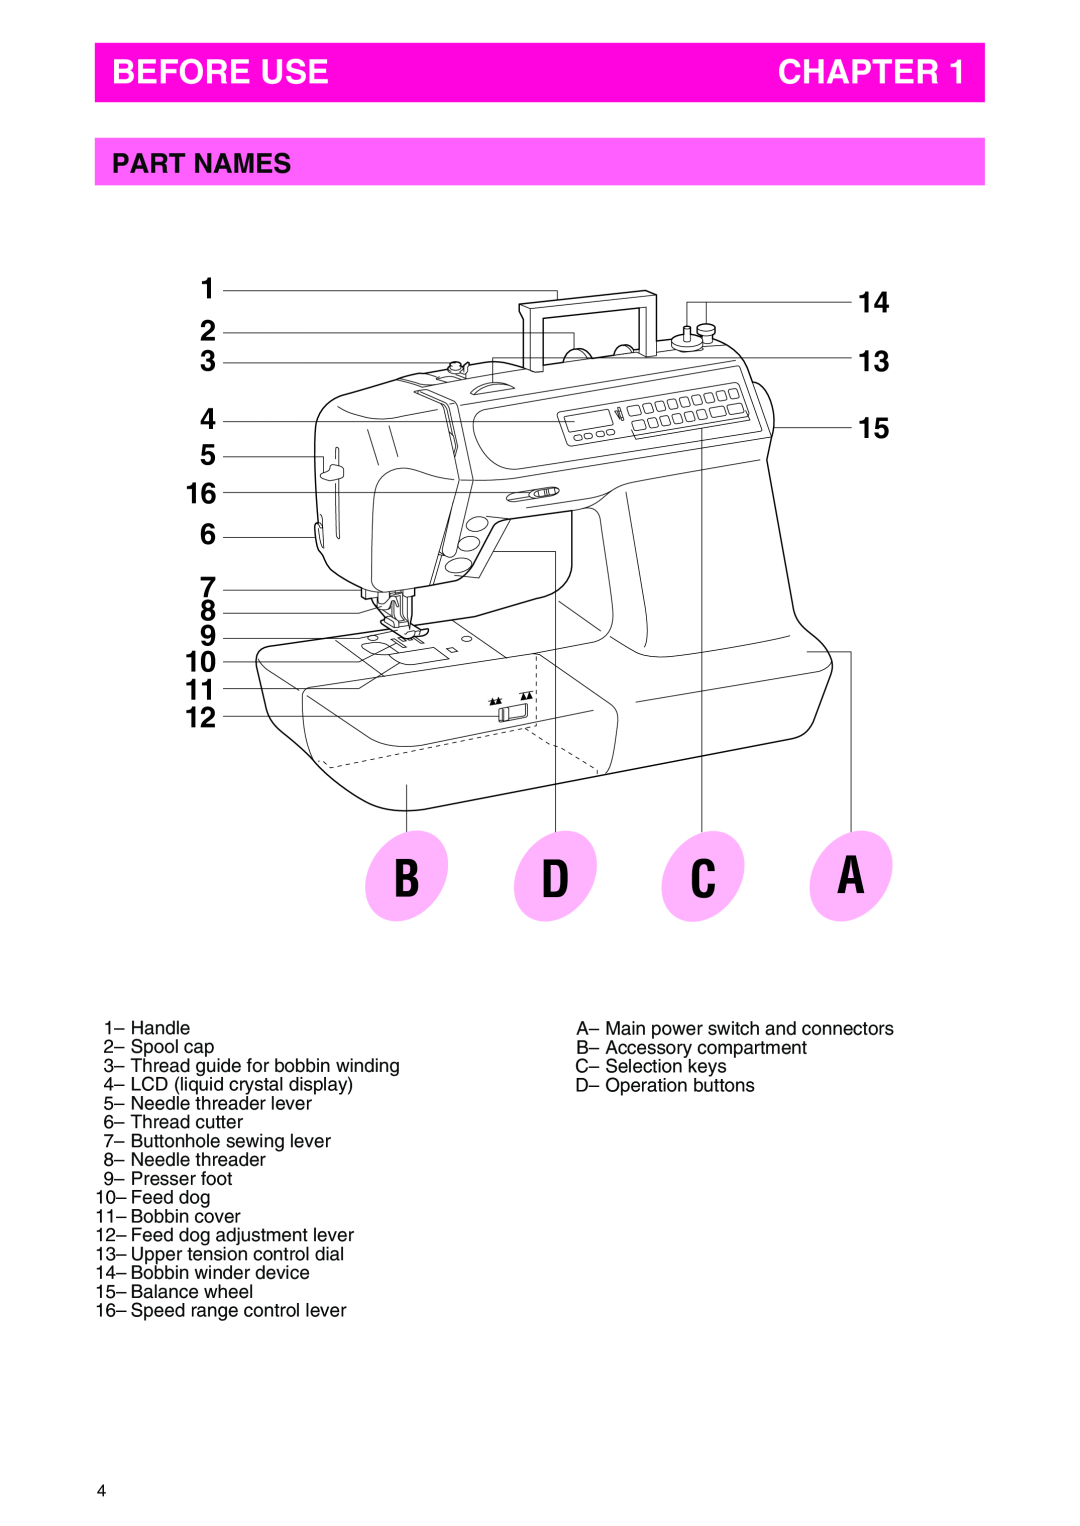 Brother PC 3000 operation manual Before Use, Chapter, Part Names, B D C A 